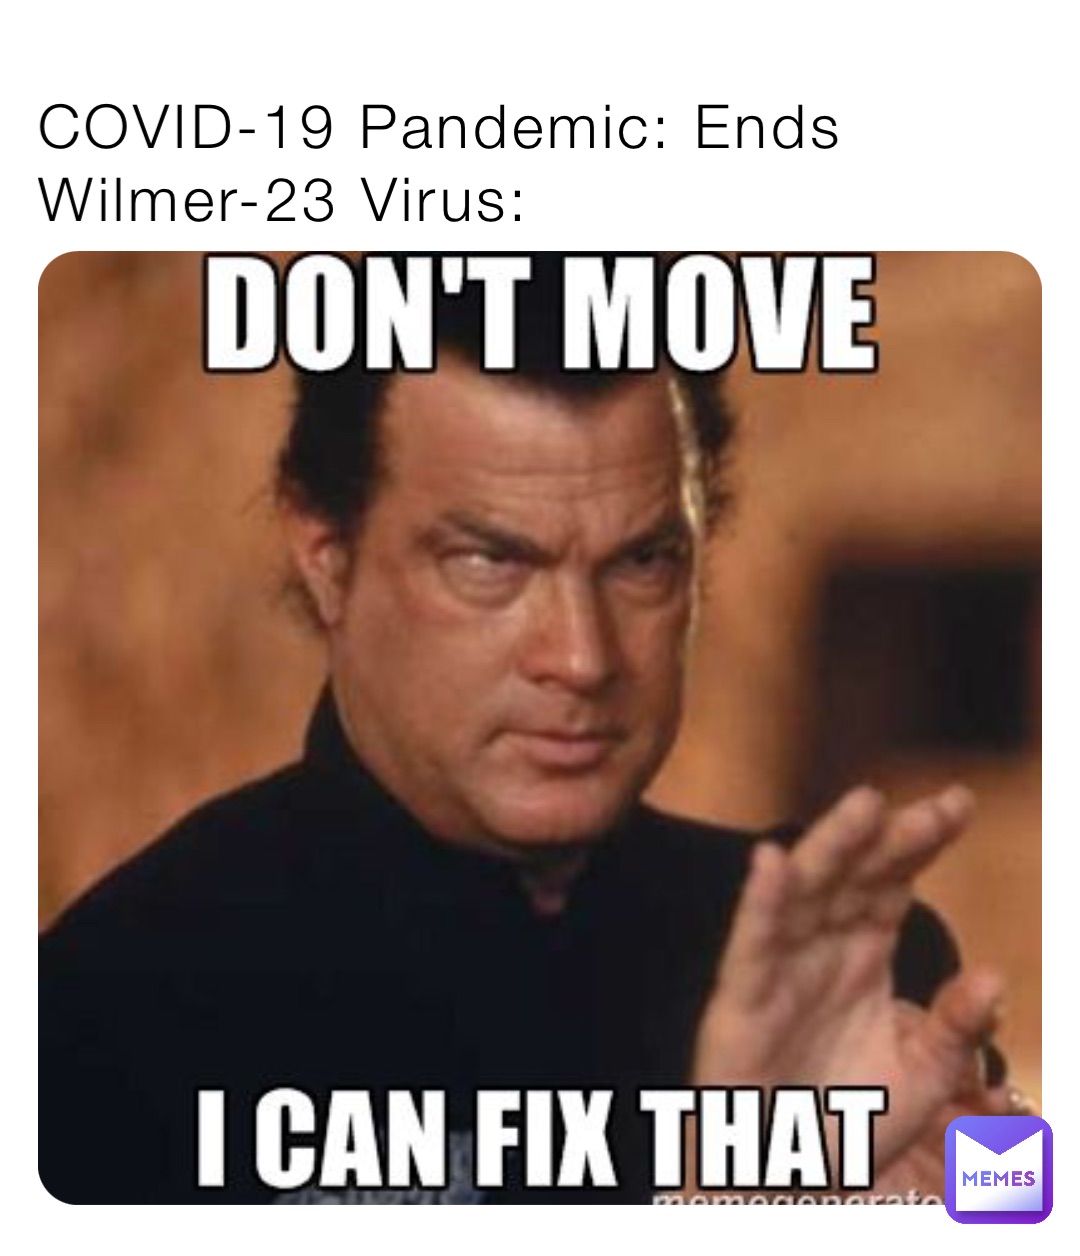 COVID-19 Pandemic: Ends
Wilmer-23 Virus: